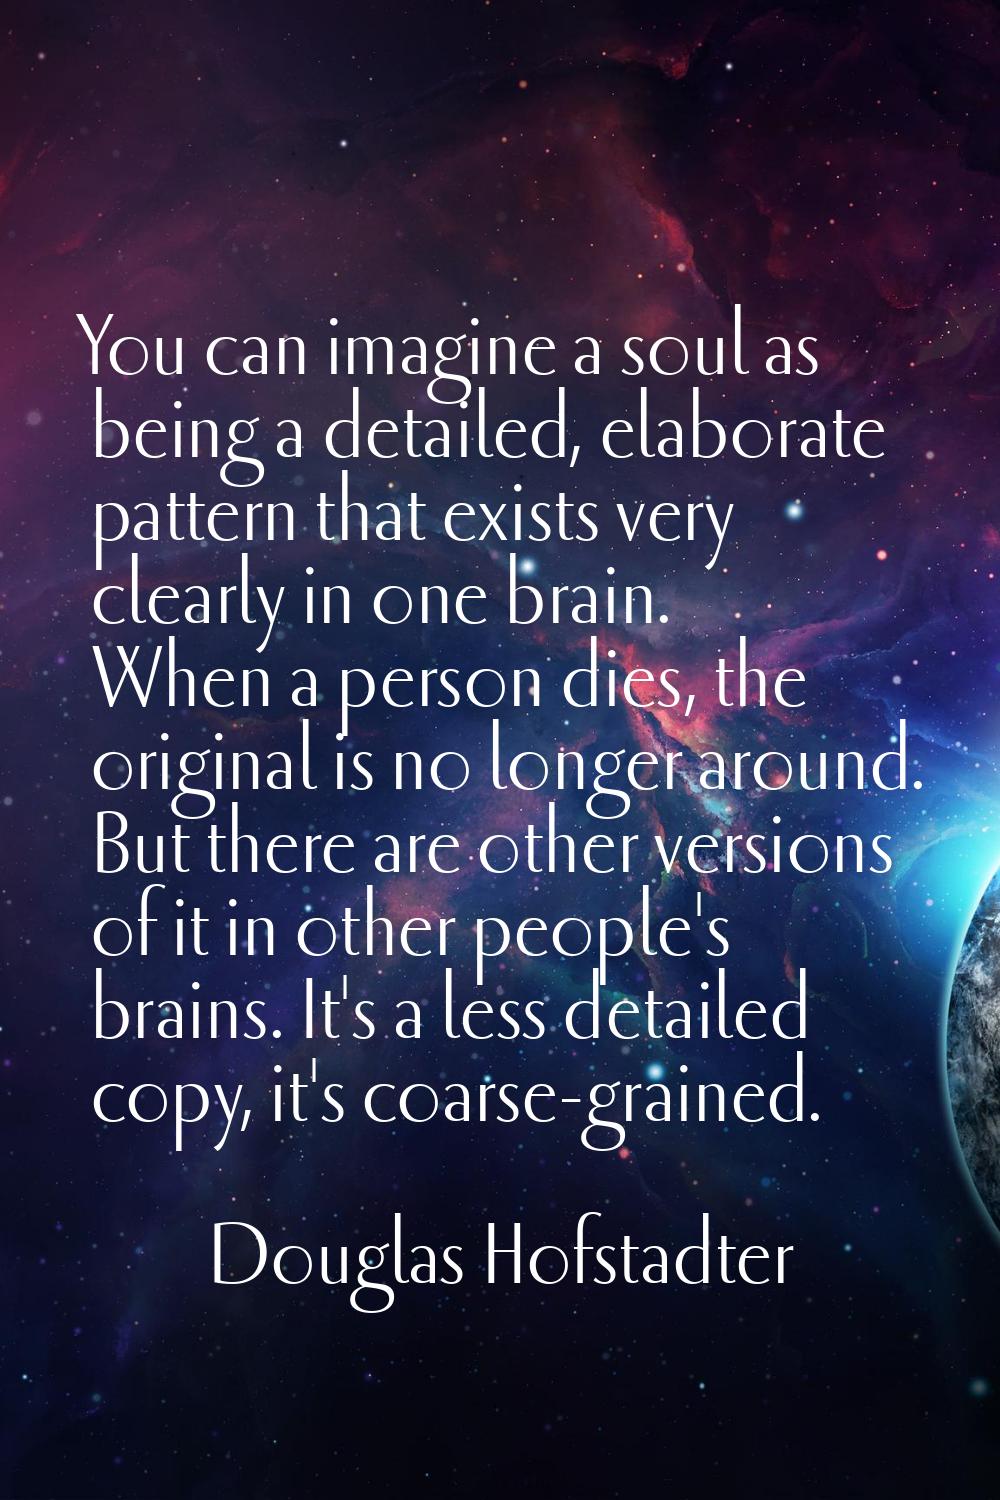 You can imagine a soul as being a detailed, elaborate pattern that exists very clearly in one brain